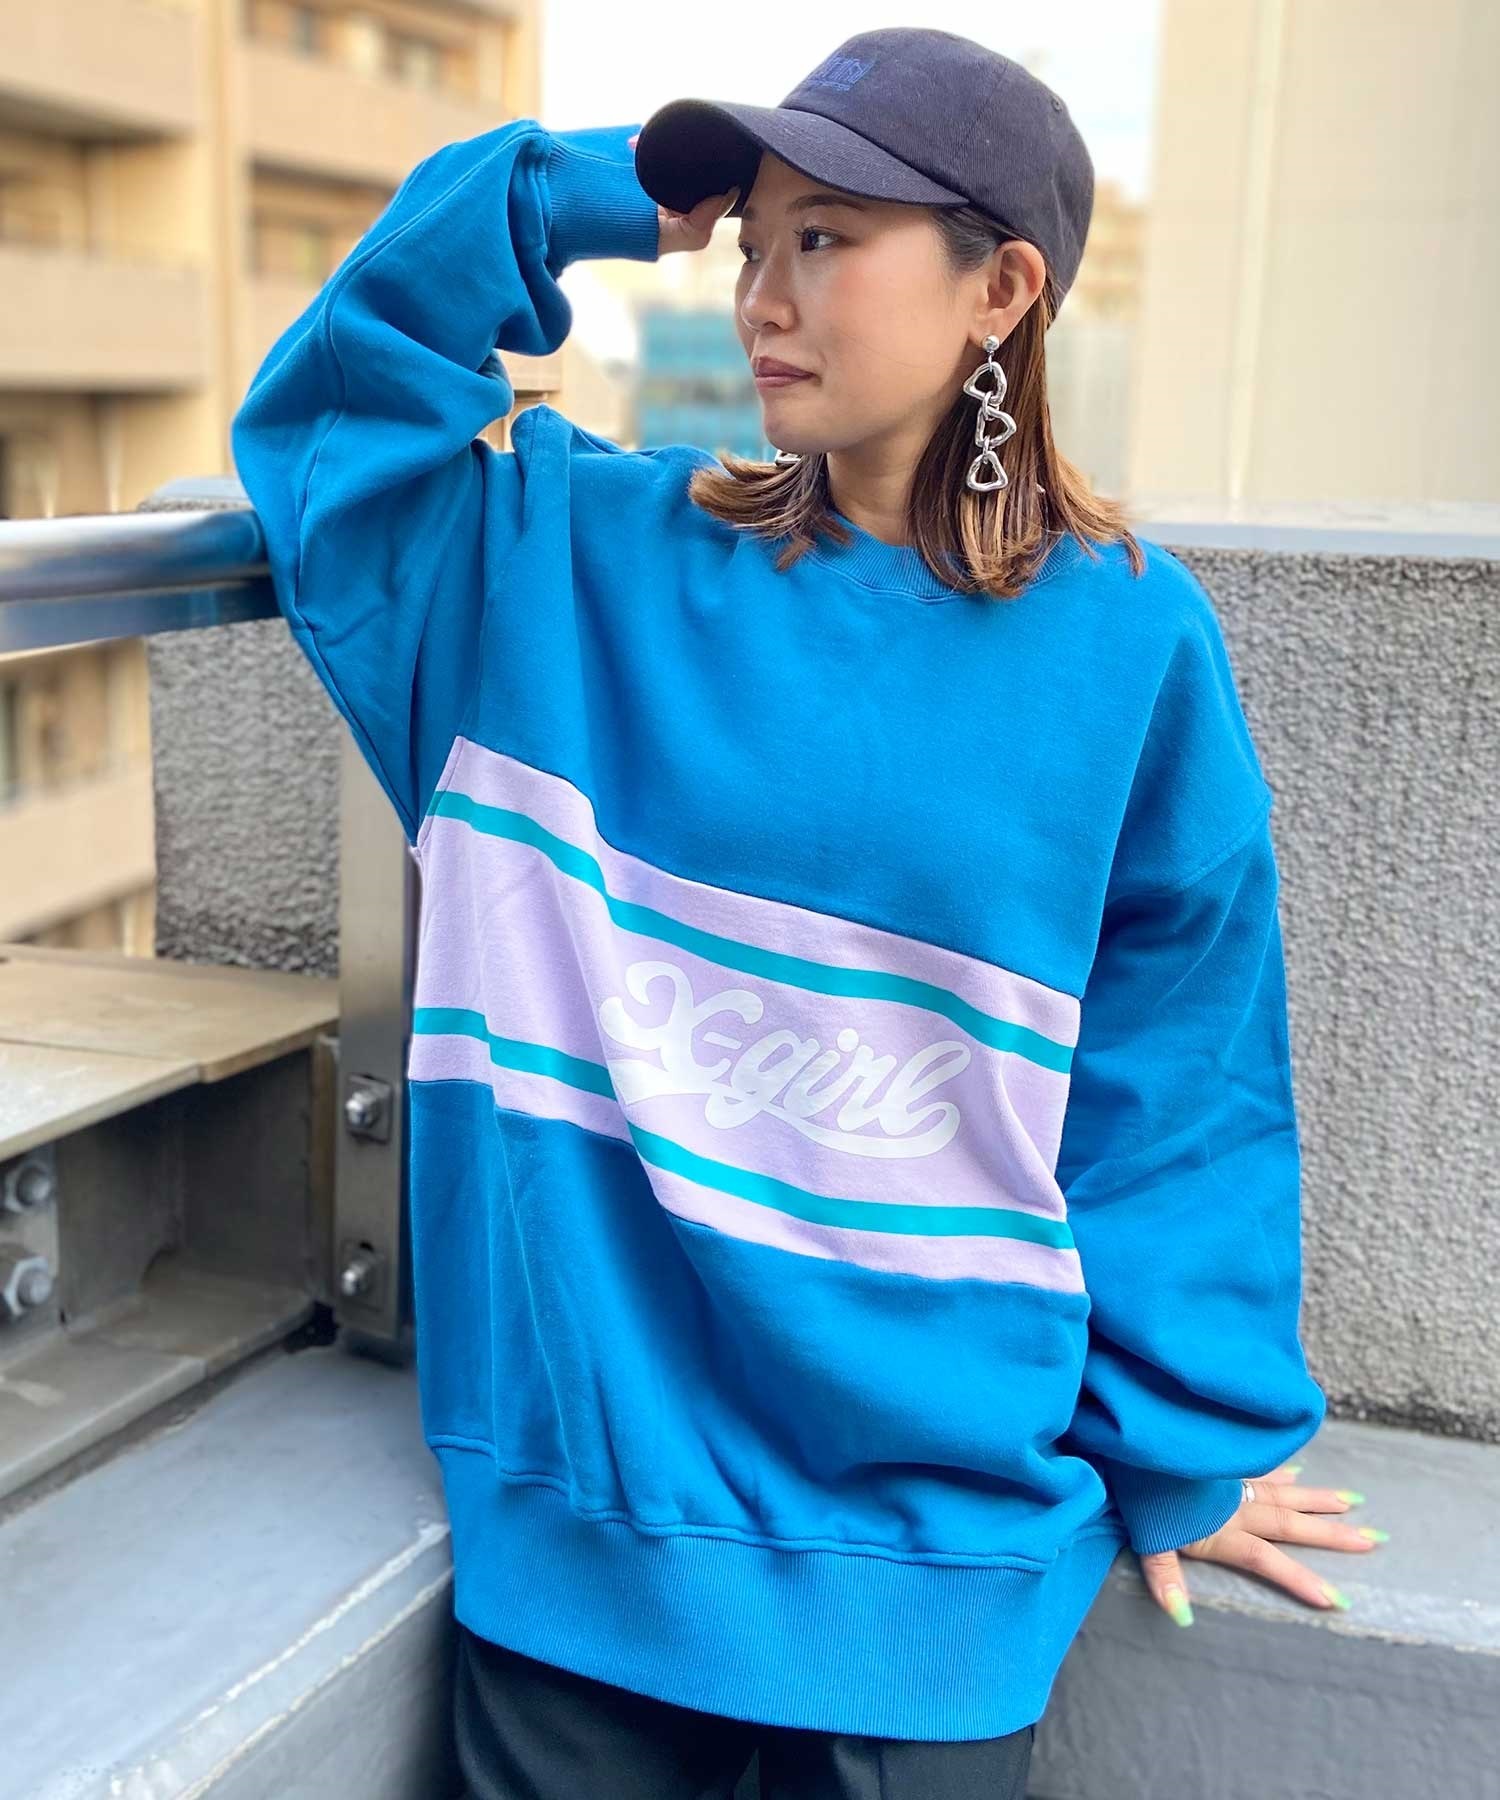 X-GIRL/エックスガール CONTRAST COLOR SWEAT TOP レディース